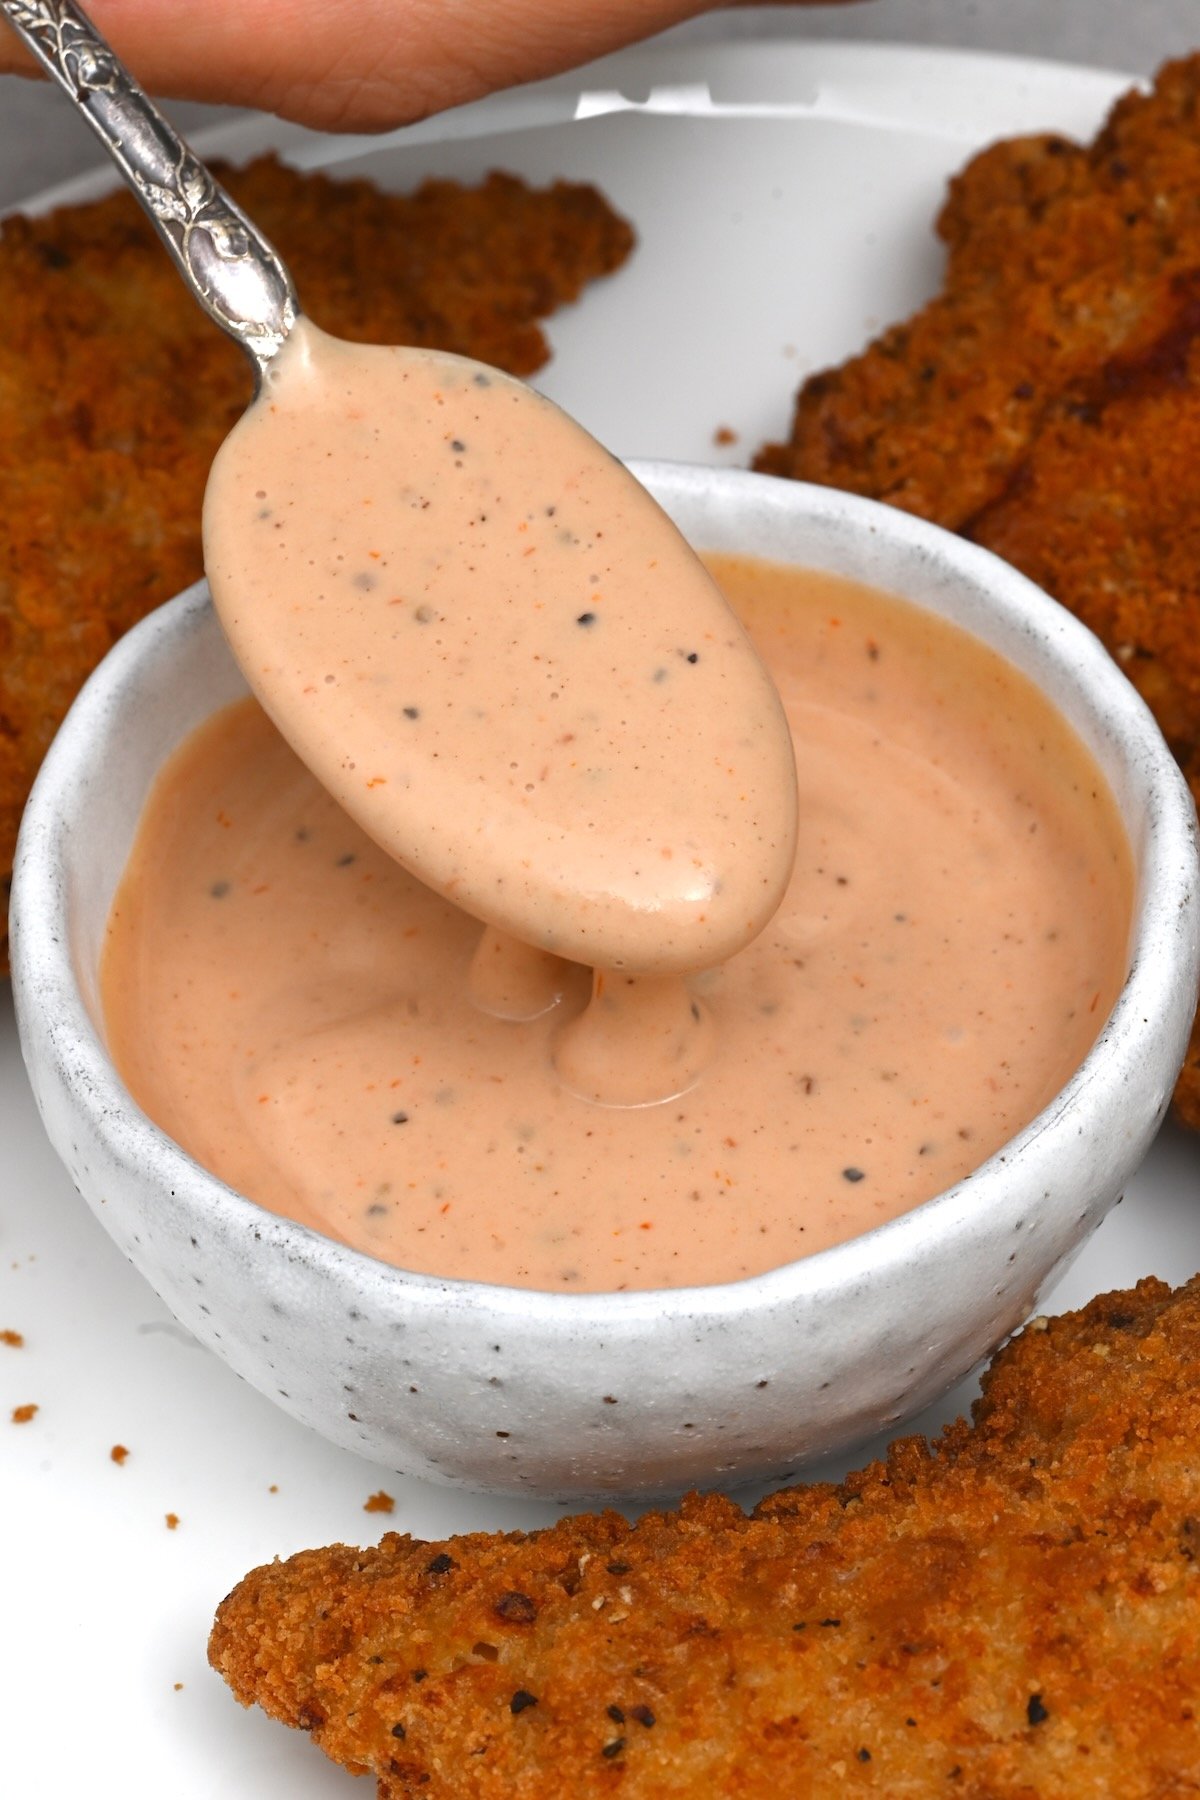 A spoonful of homemade Raising Cane's sauce